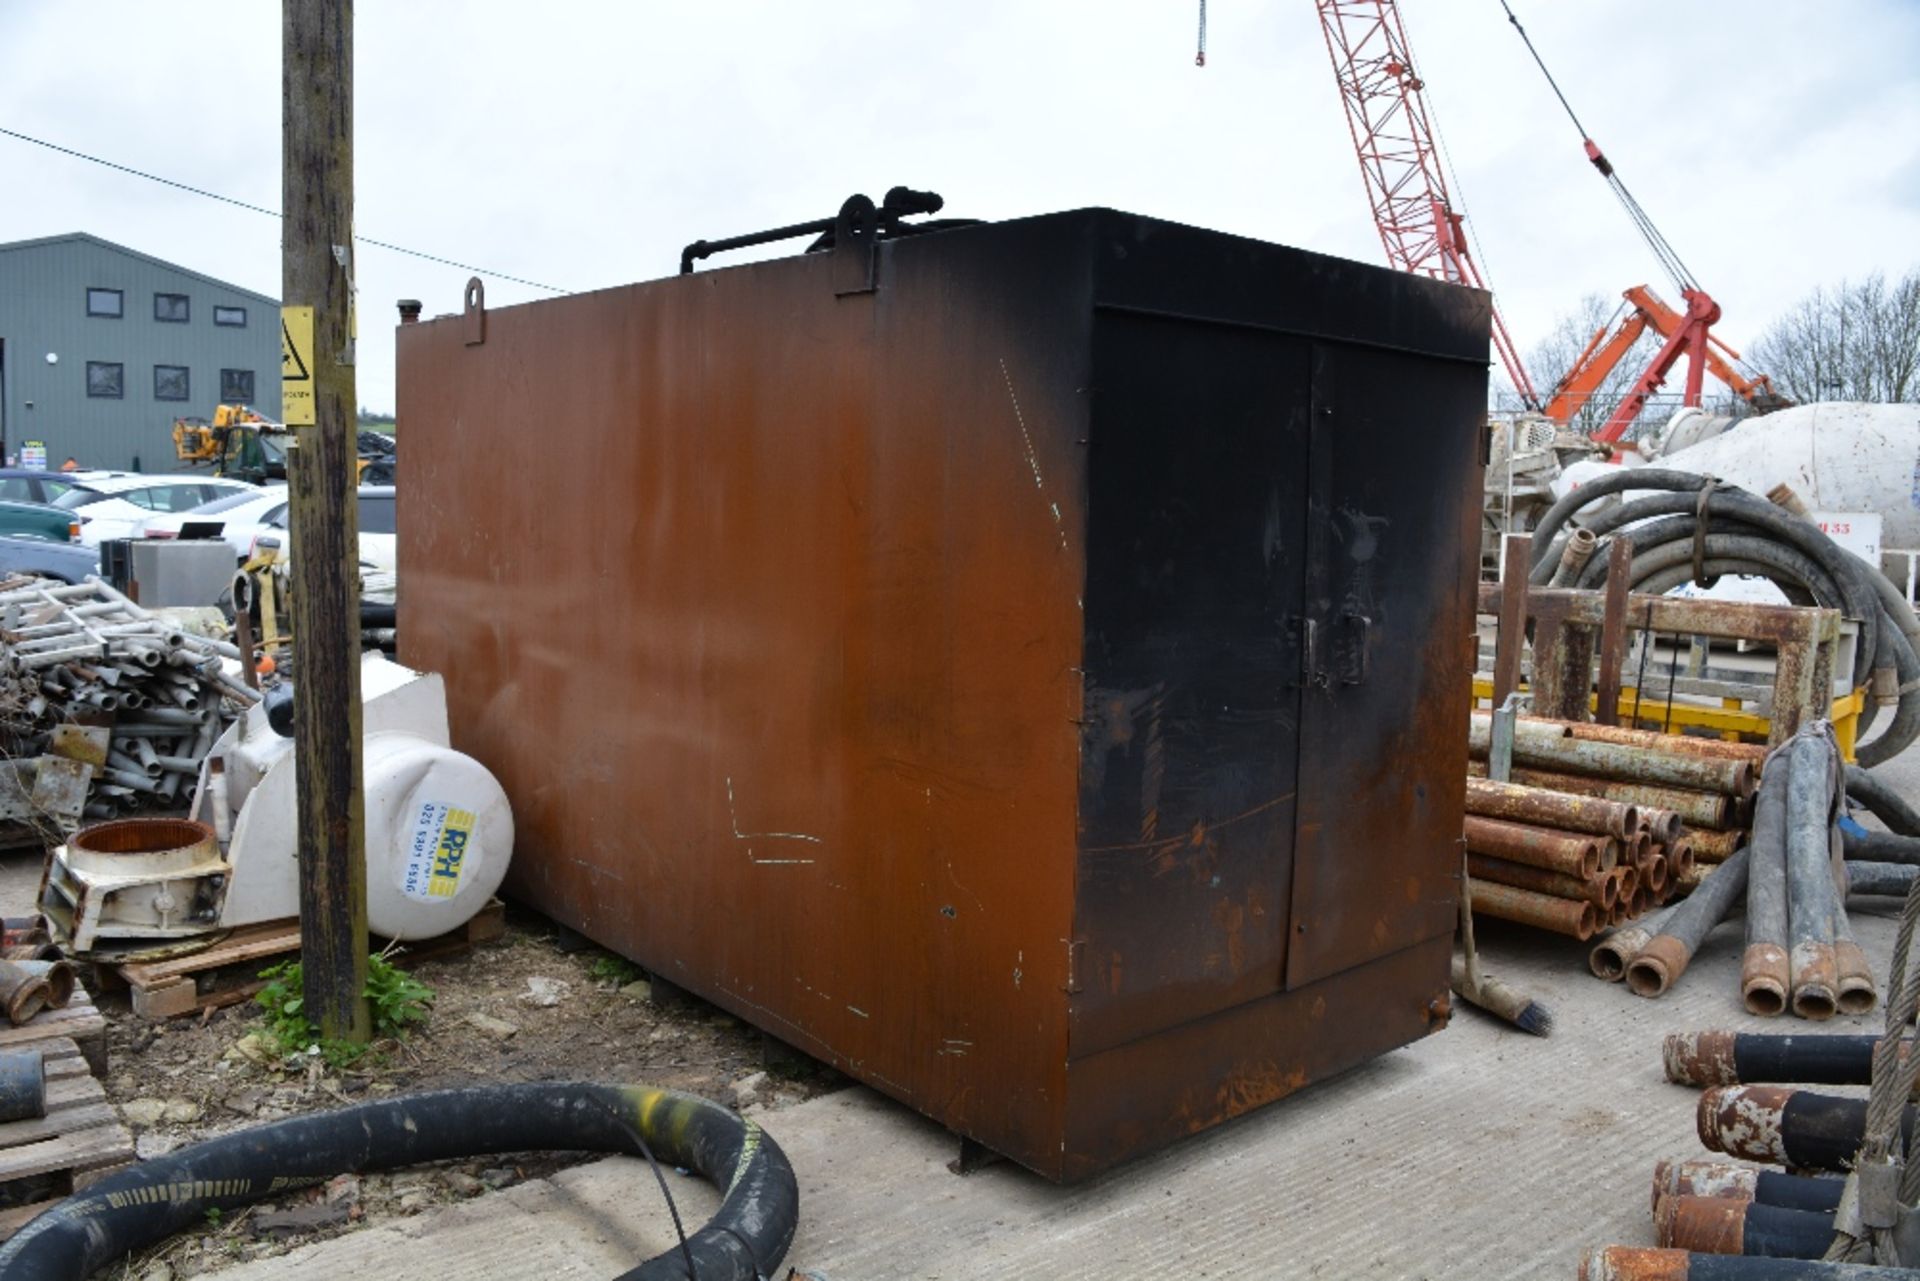 5,570 LITRE BUNDED DIESEL TANK (YEAR 2015), C/W 230V PUMP, BEEN USED FOR RED DIESEL, ID: PL-15633, - Image 2 of 8